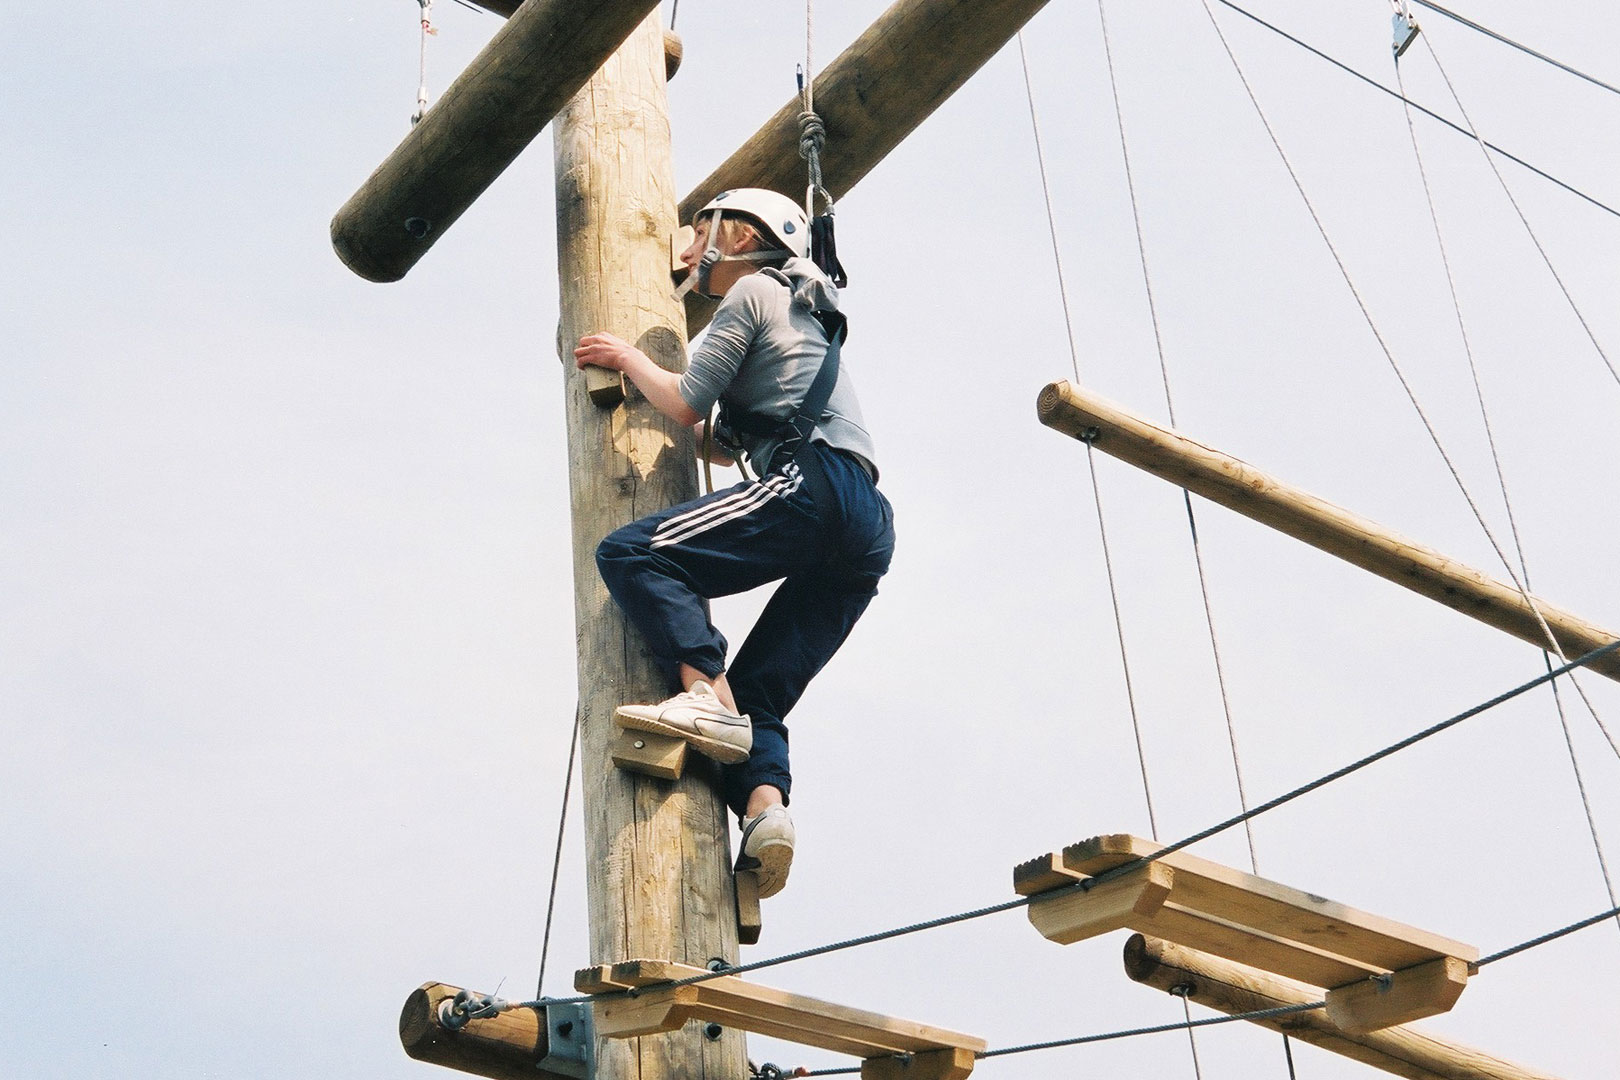 High ropes make a great activity for groups of adults looking for adventure